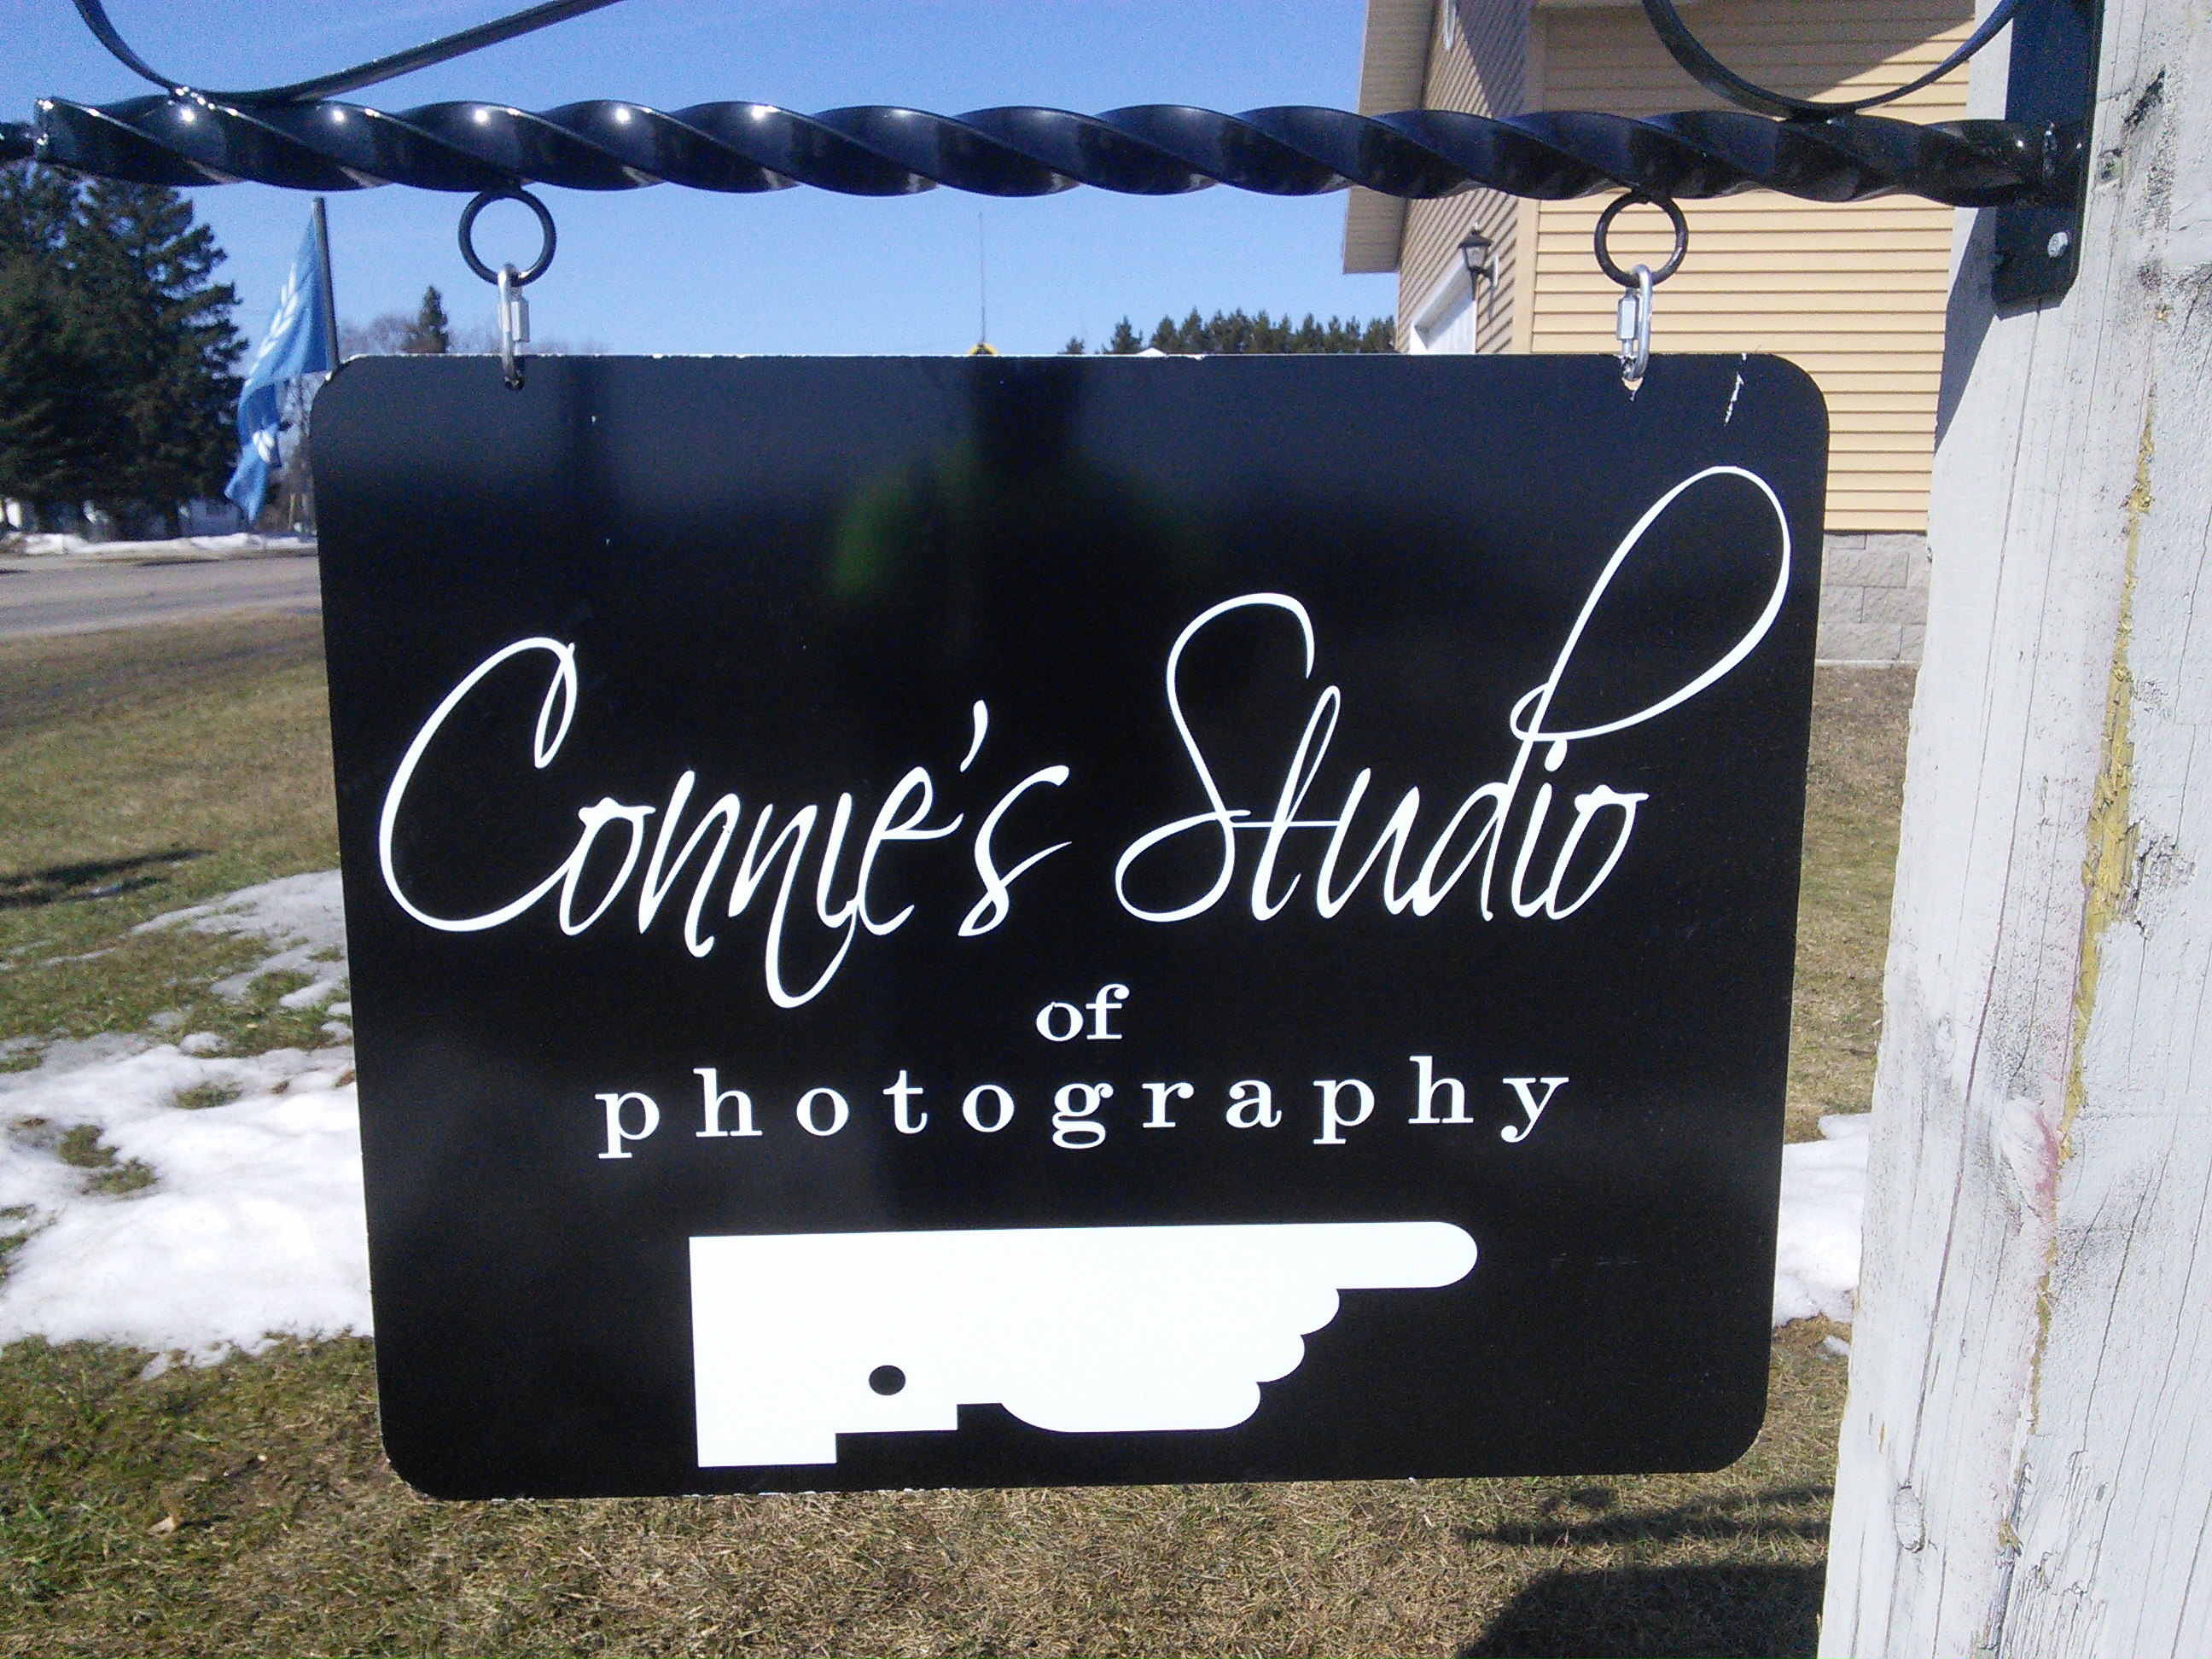 Connie's Studio of Photography sign